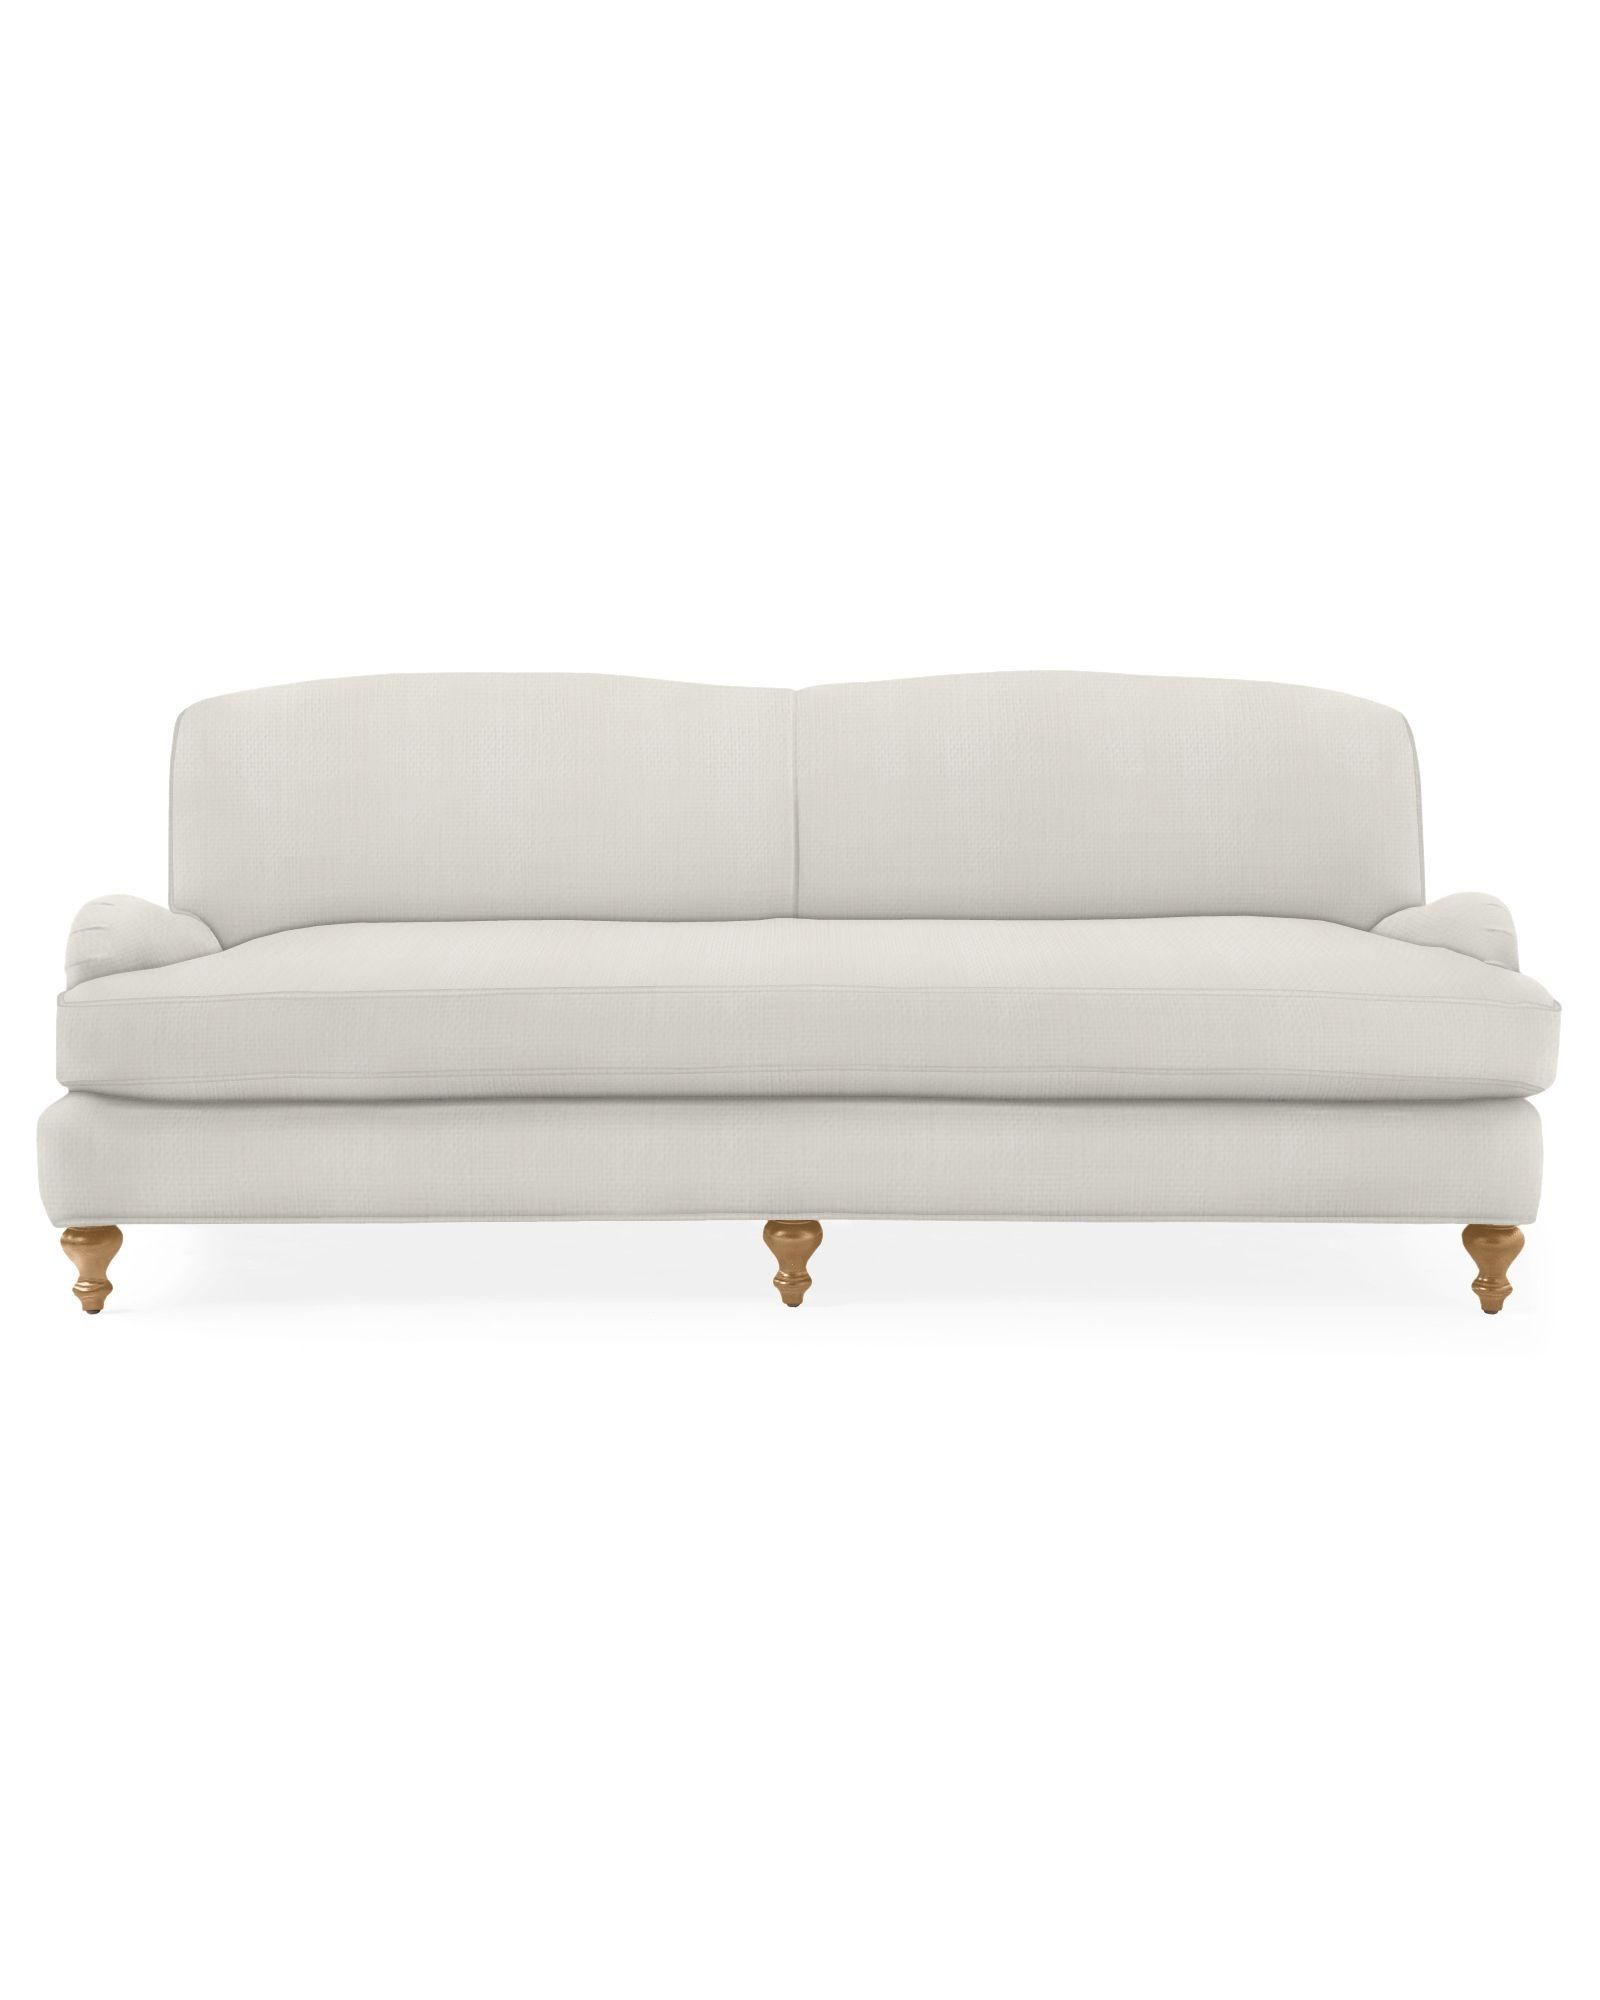 Miramar Sofa with Bench Seat | Serena and Lily